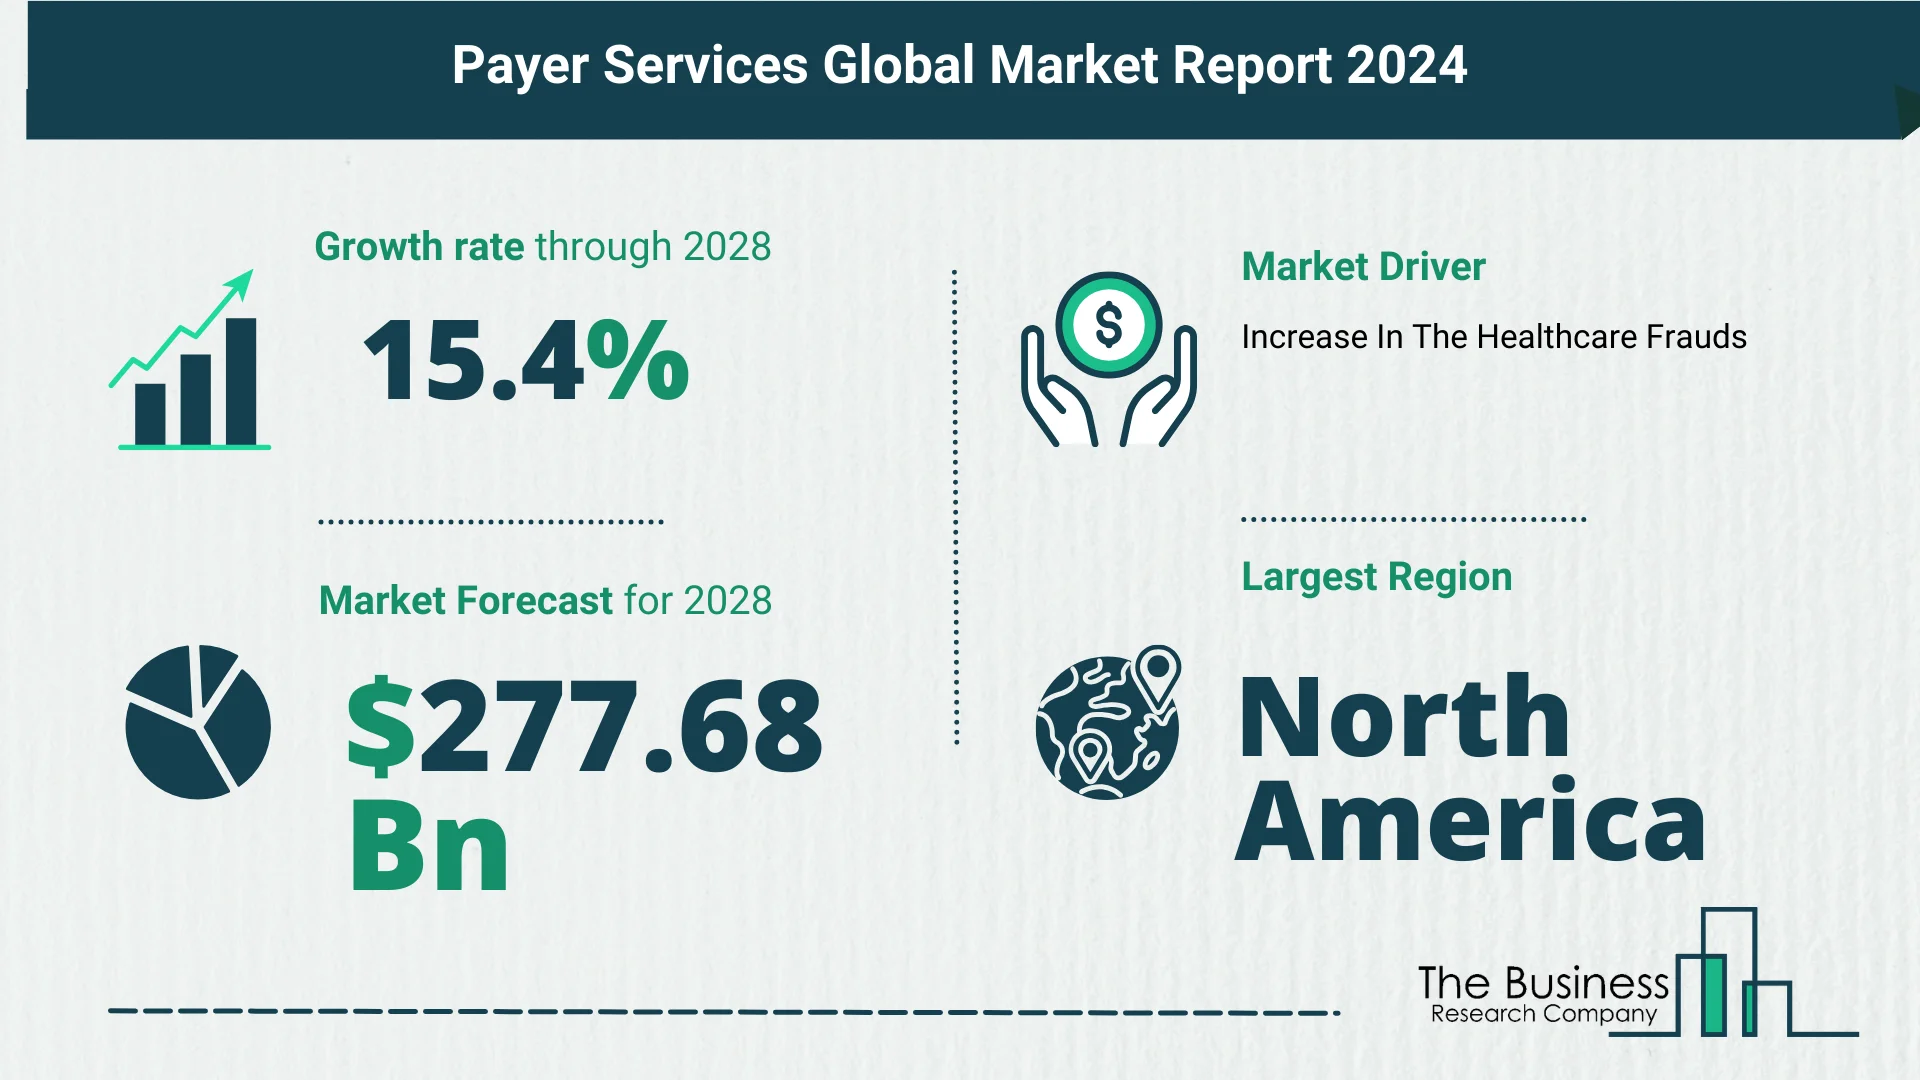 Global Payer Services Market Size